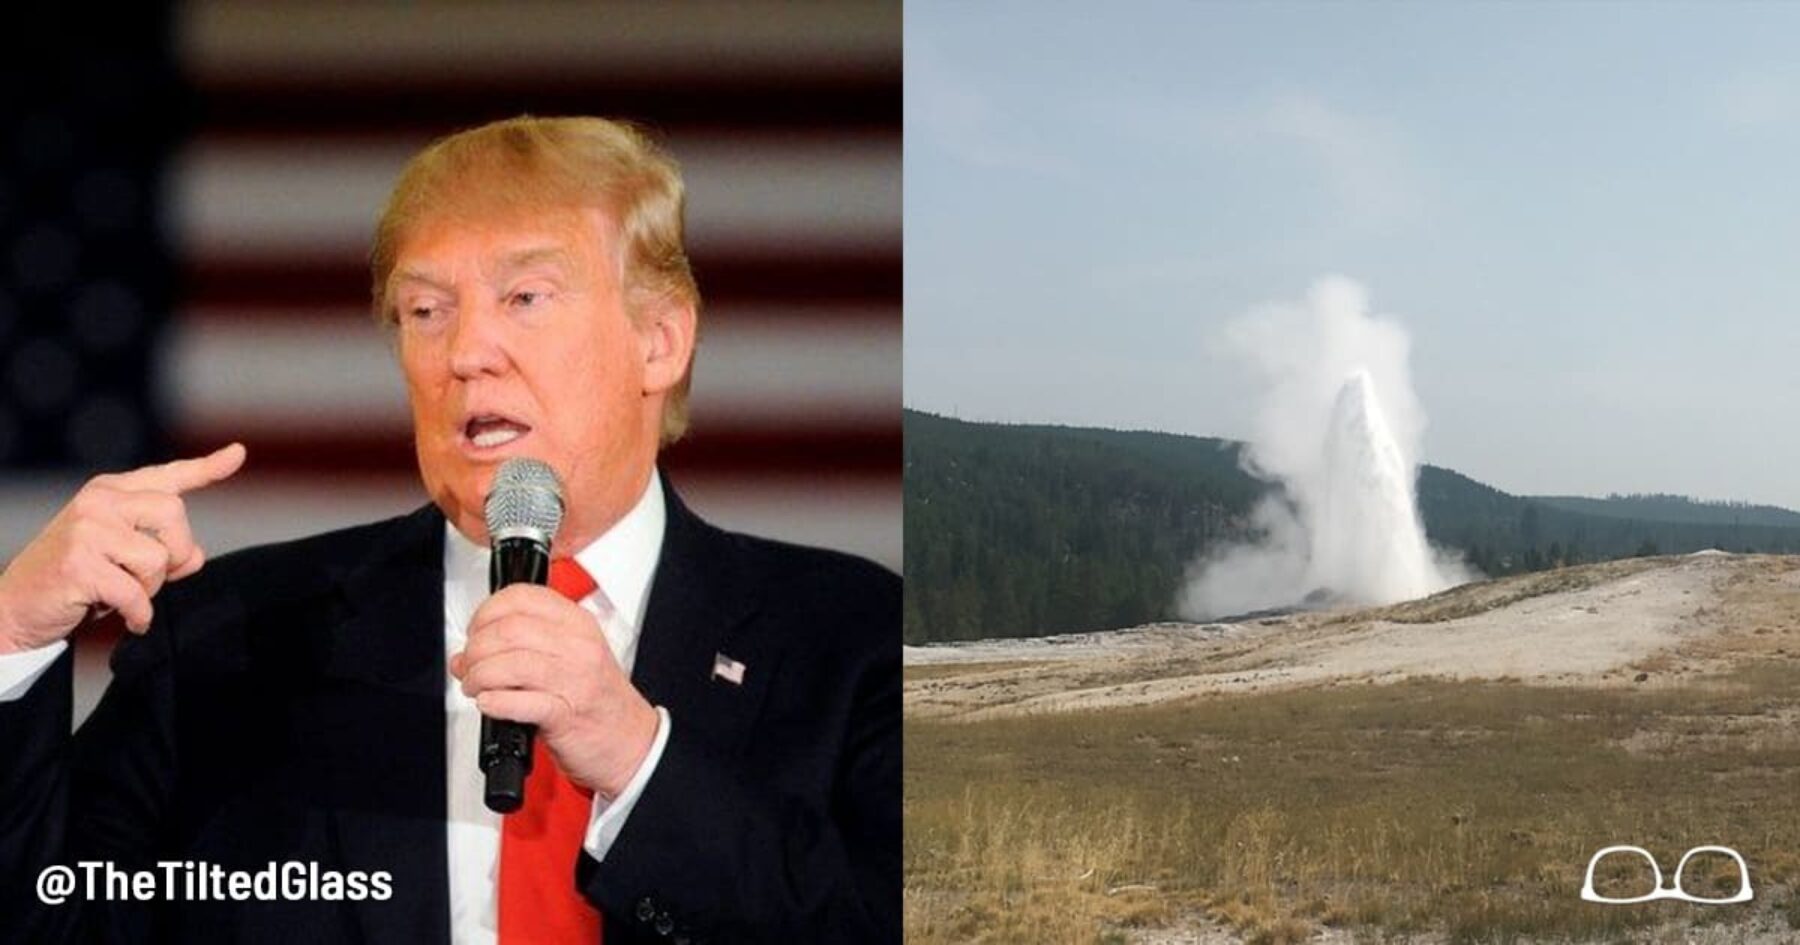 Trump cuts Yellowstone, says “Who needs Old Faithful when my anus erupts every hour on the hour?”